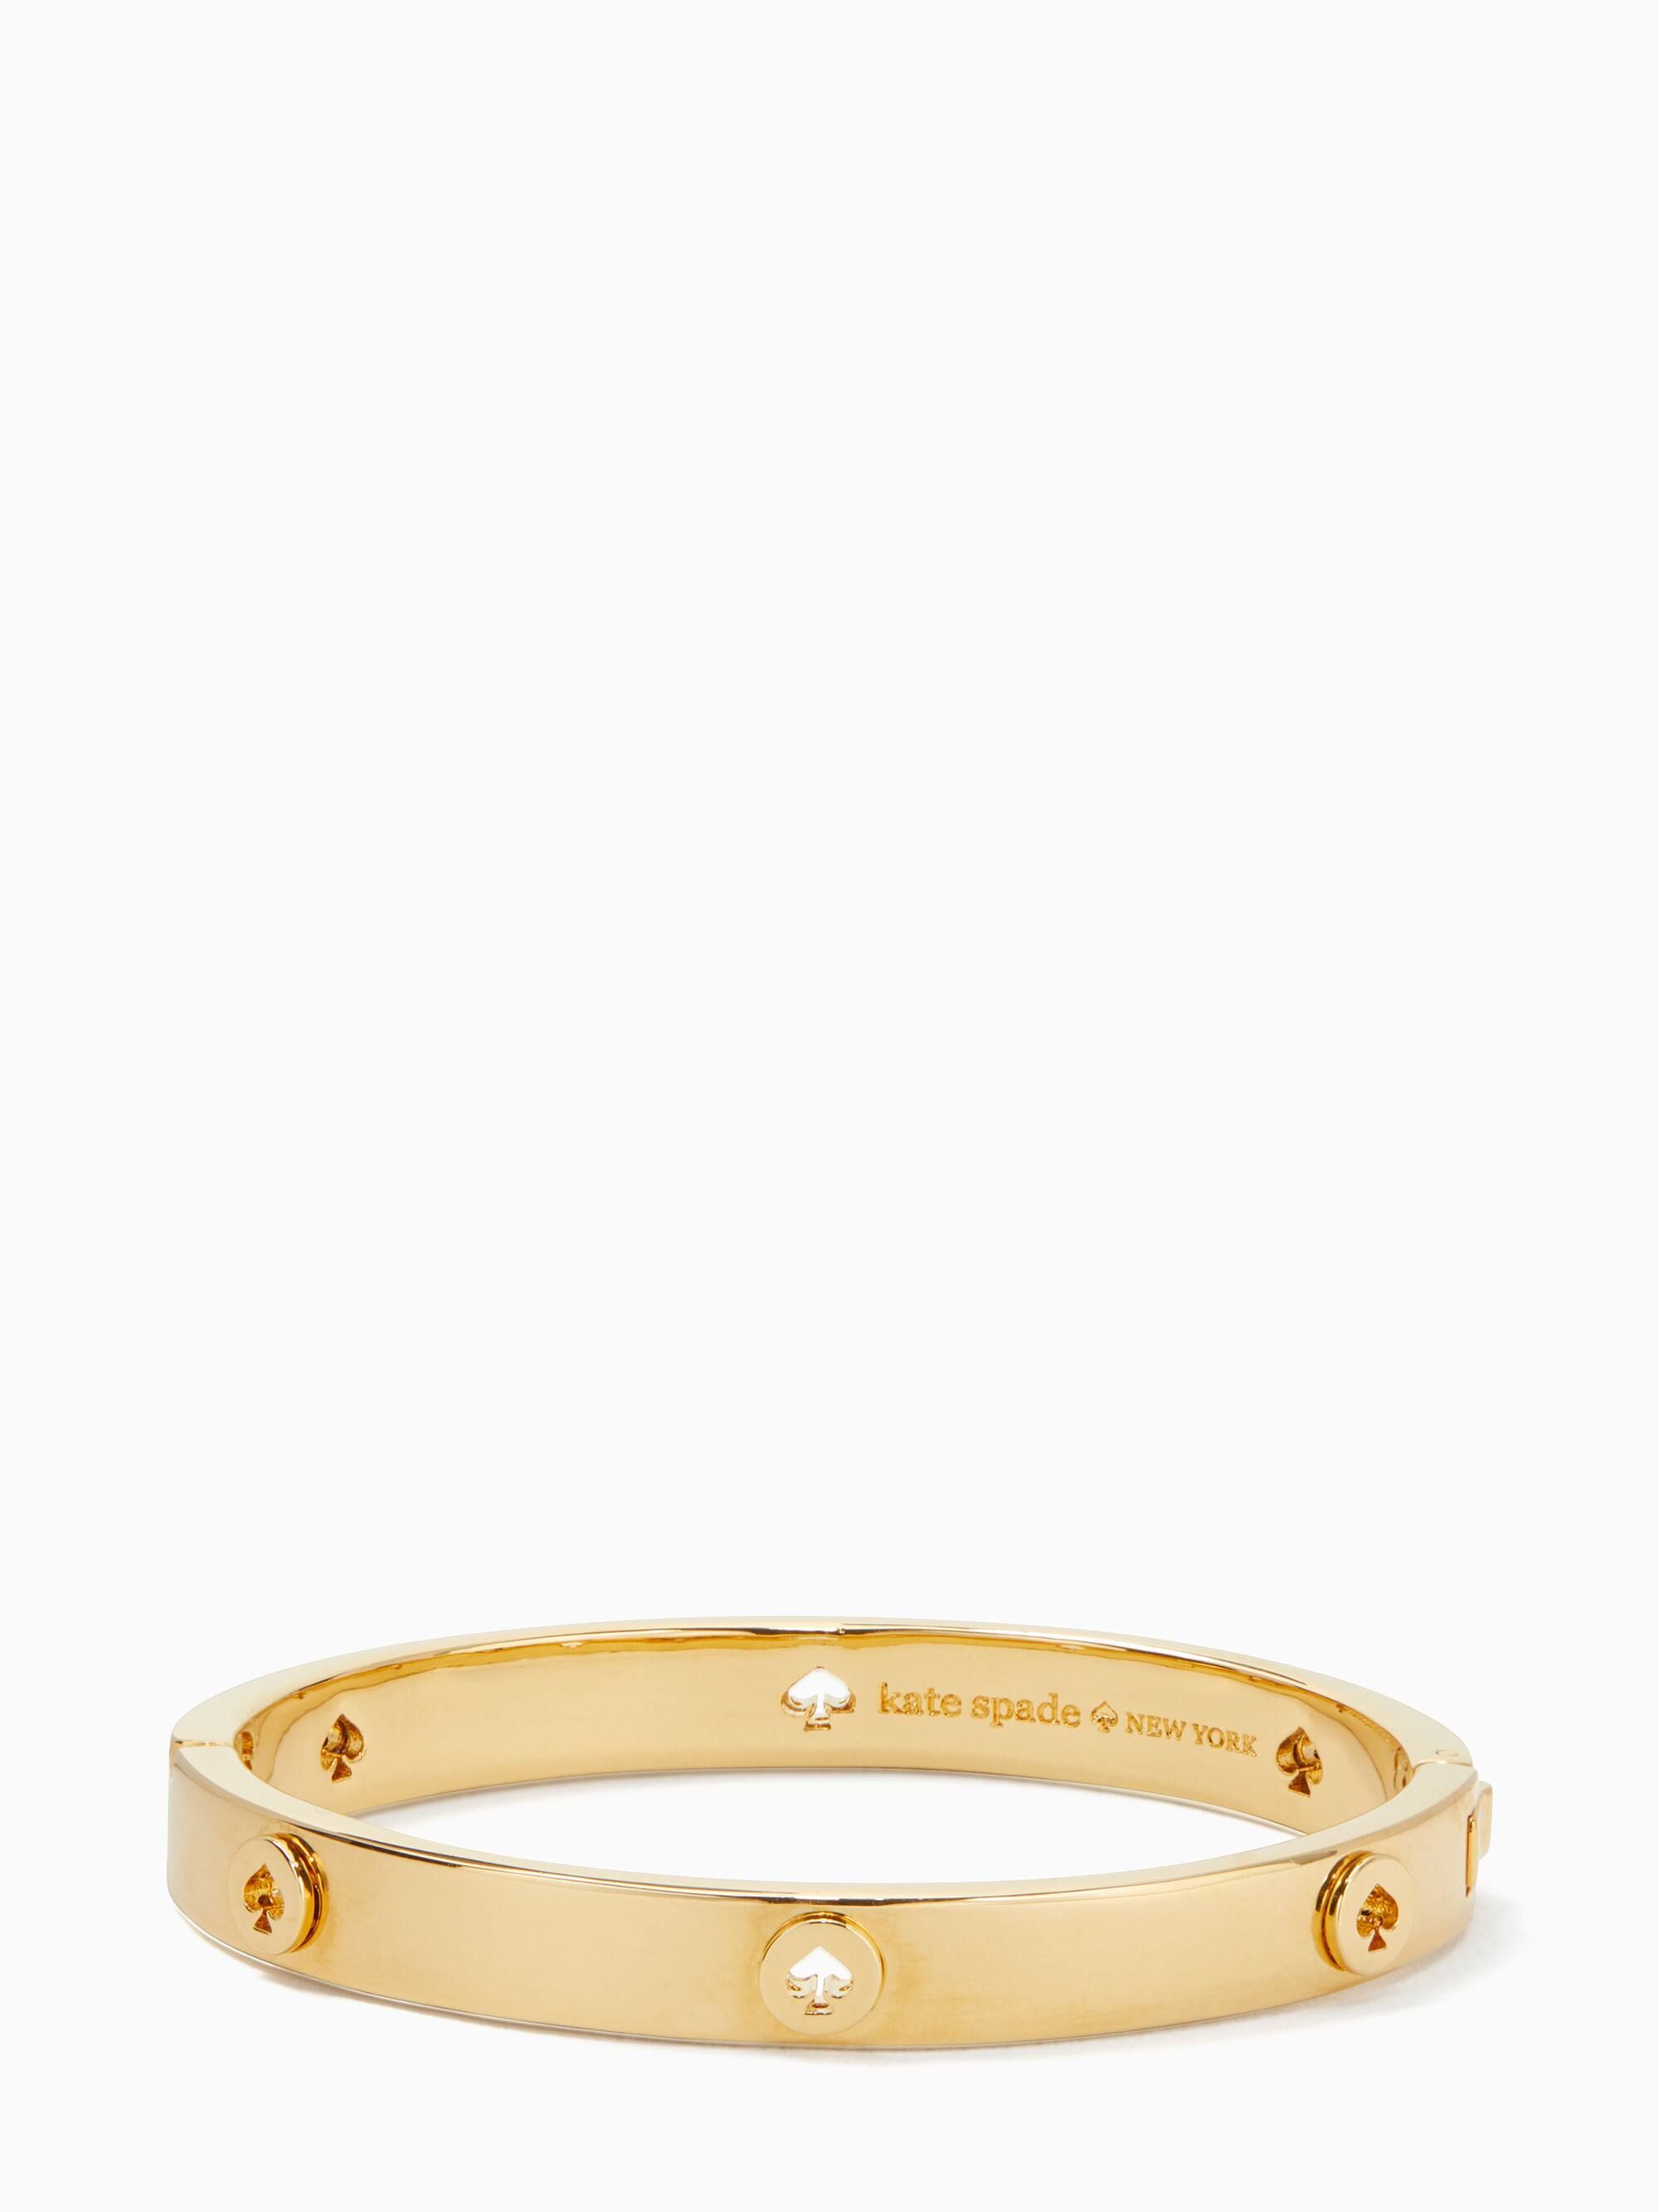 spot the spade studded hinged bangle | Kate Spade Outlet